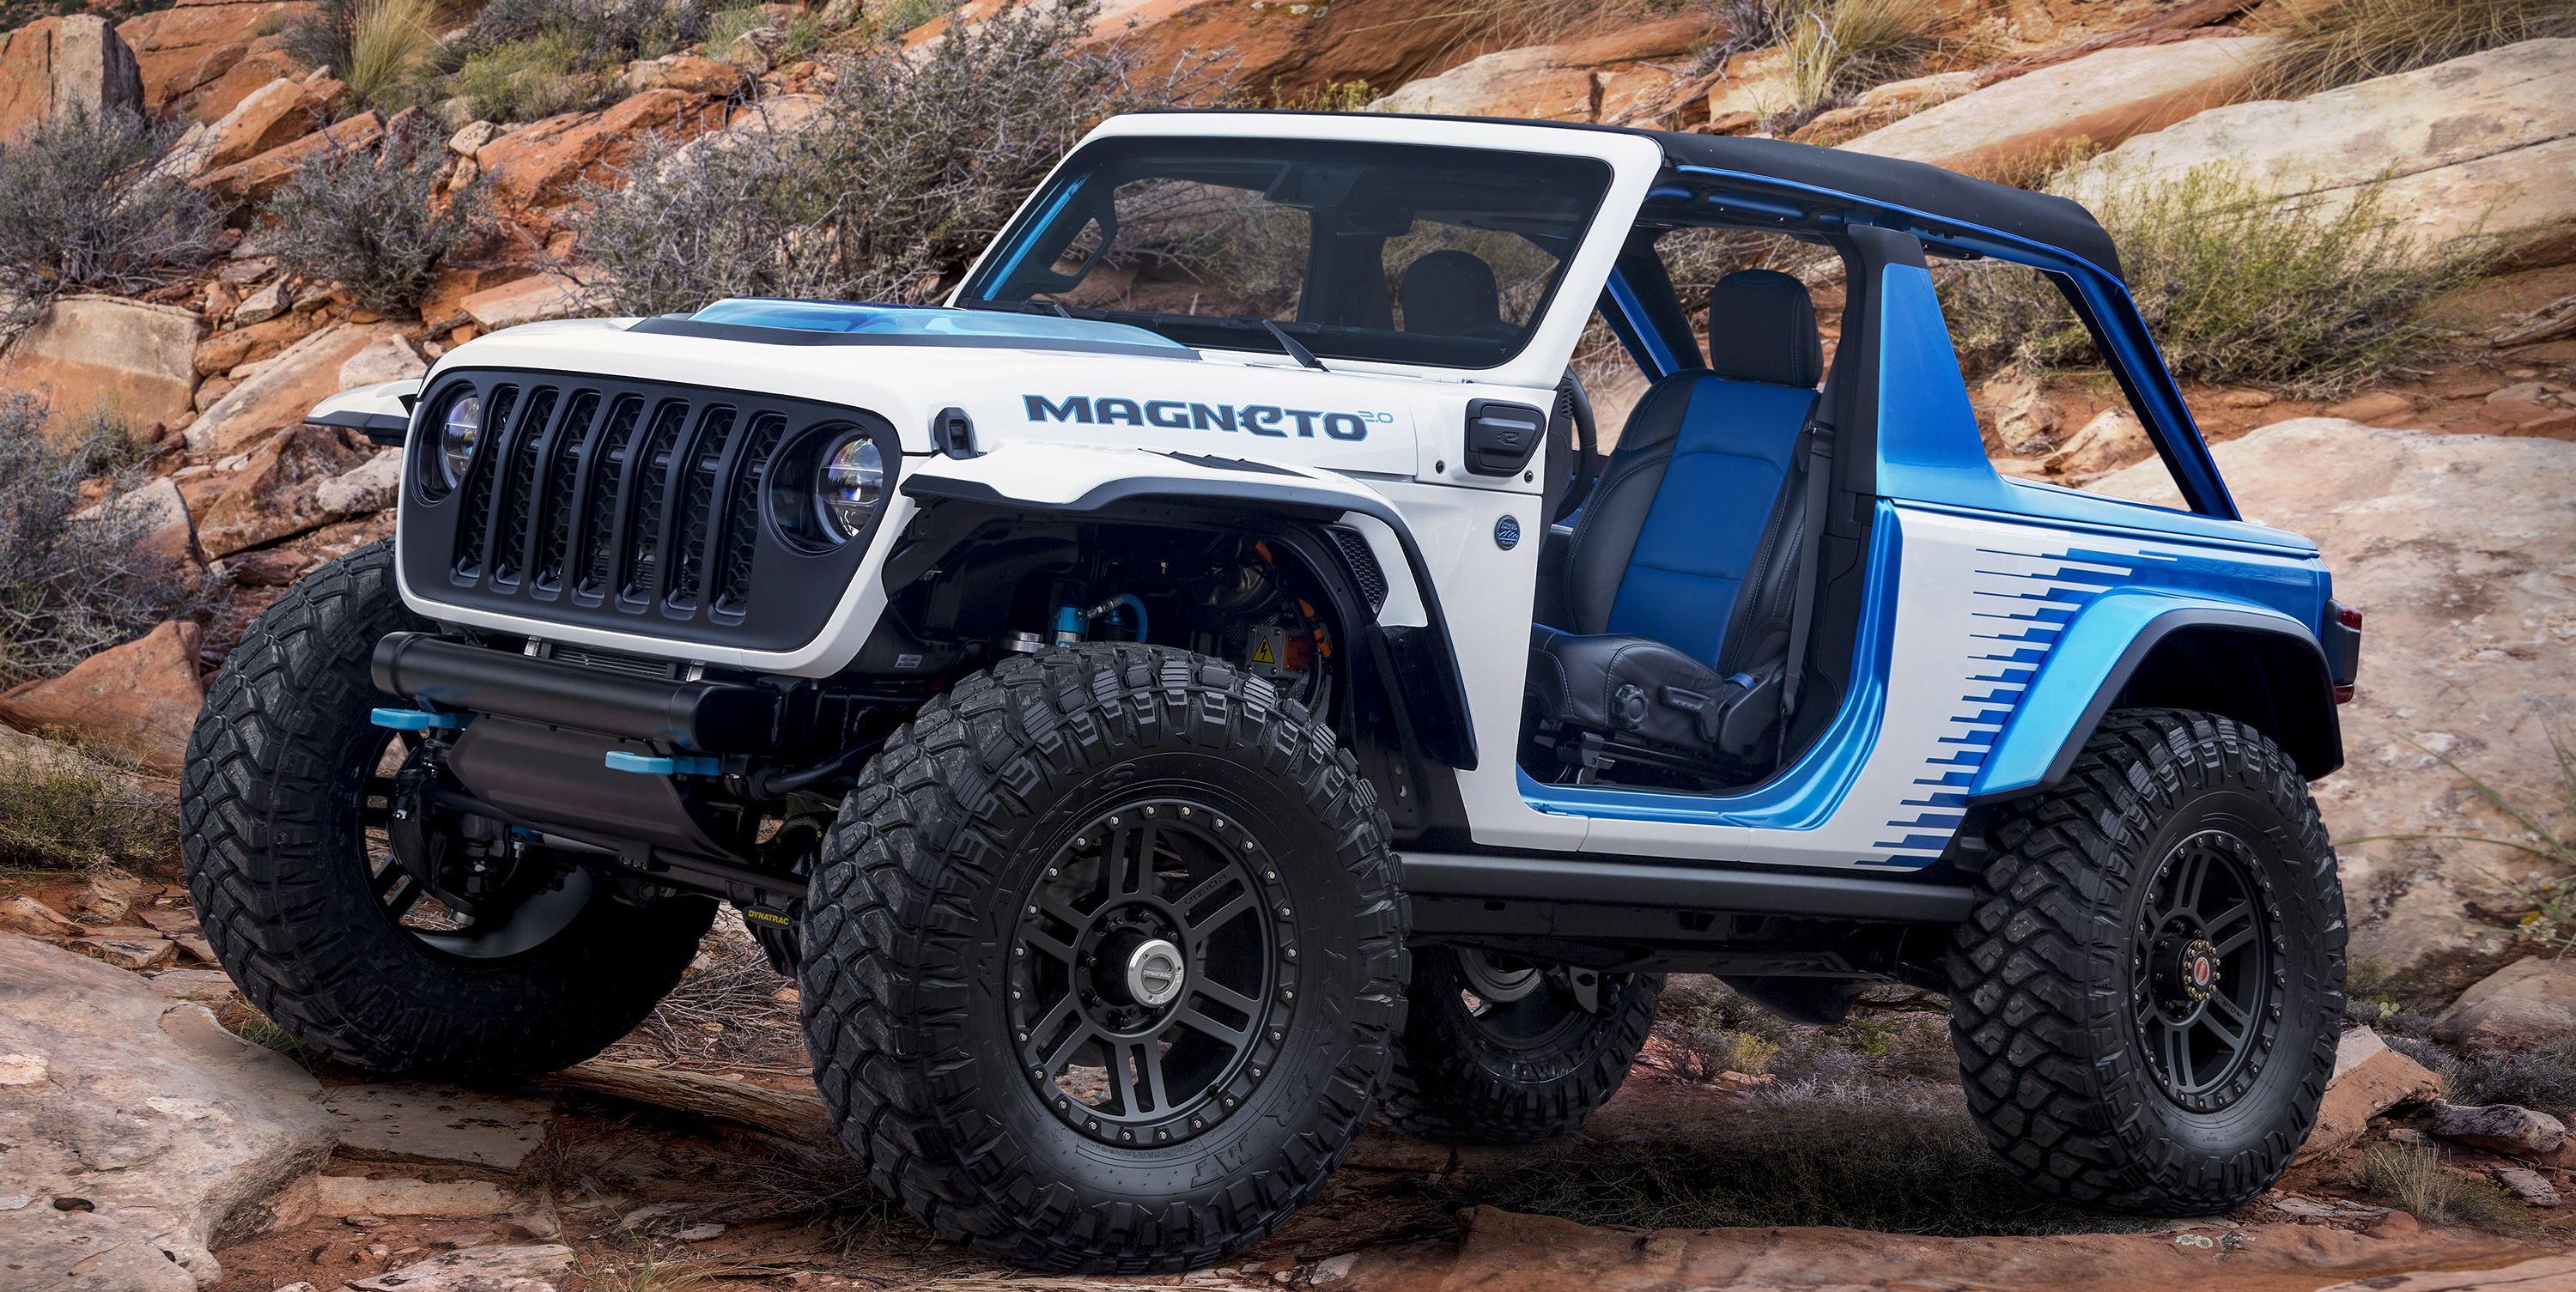 The Jeep Wrangler Magneto 2.0 Is an EV Concept That Hits 60 MPH in 2 Seconds